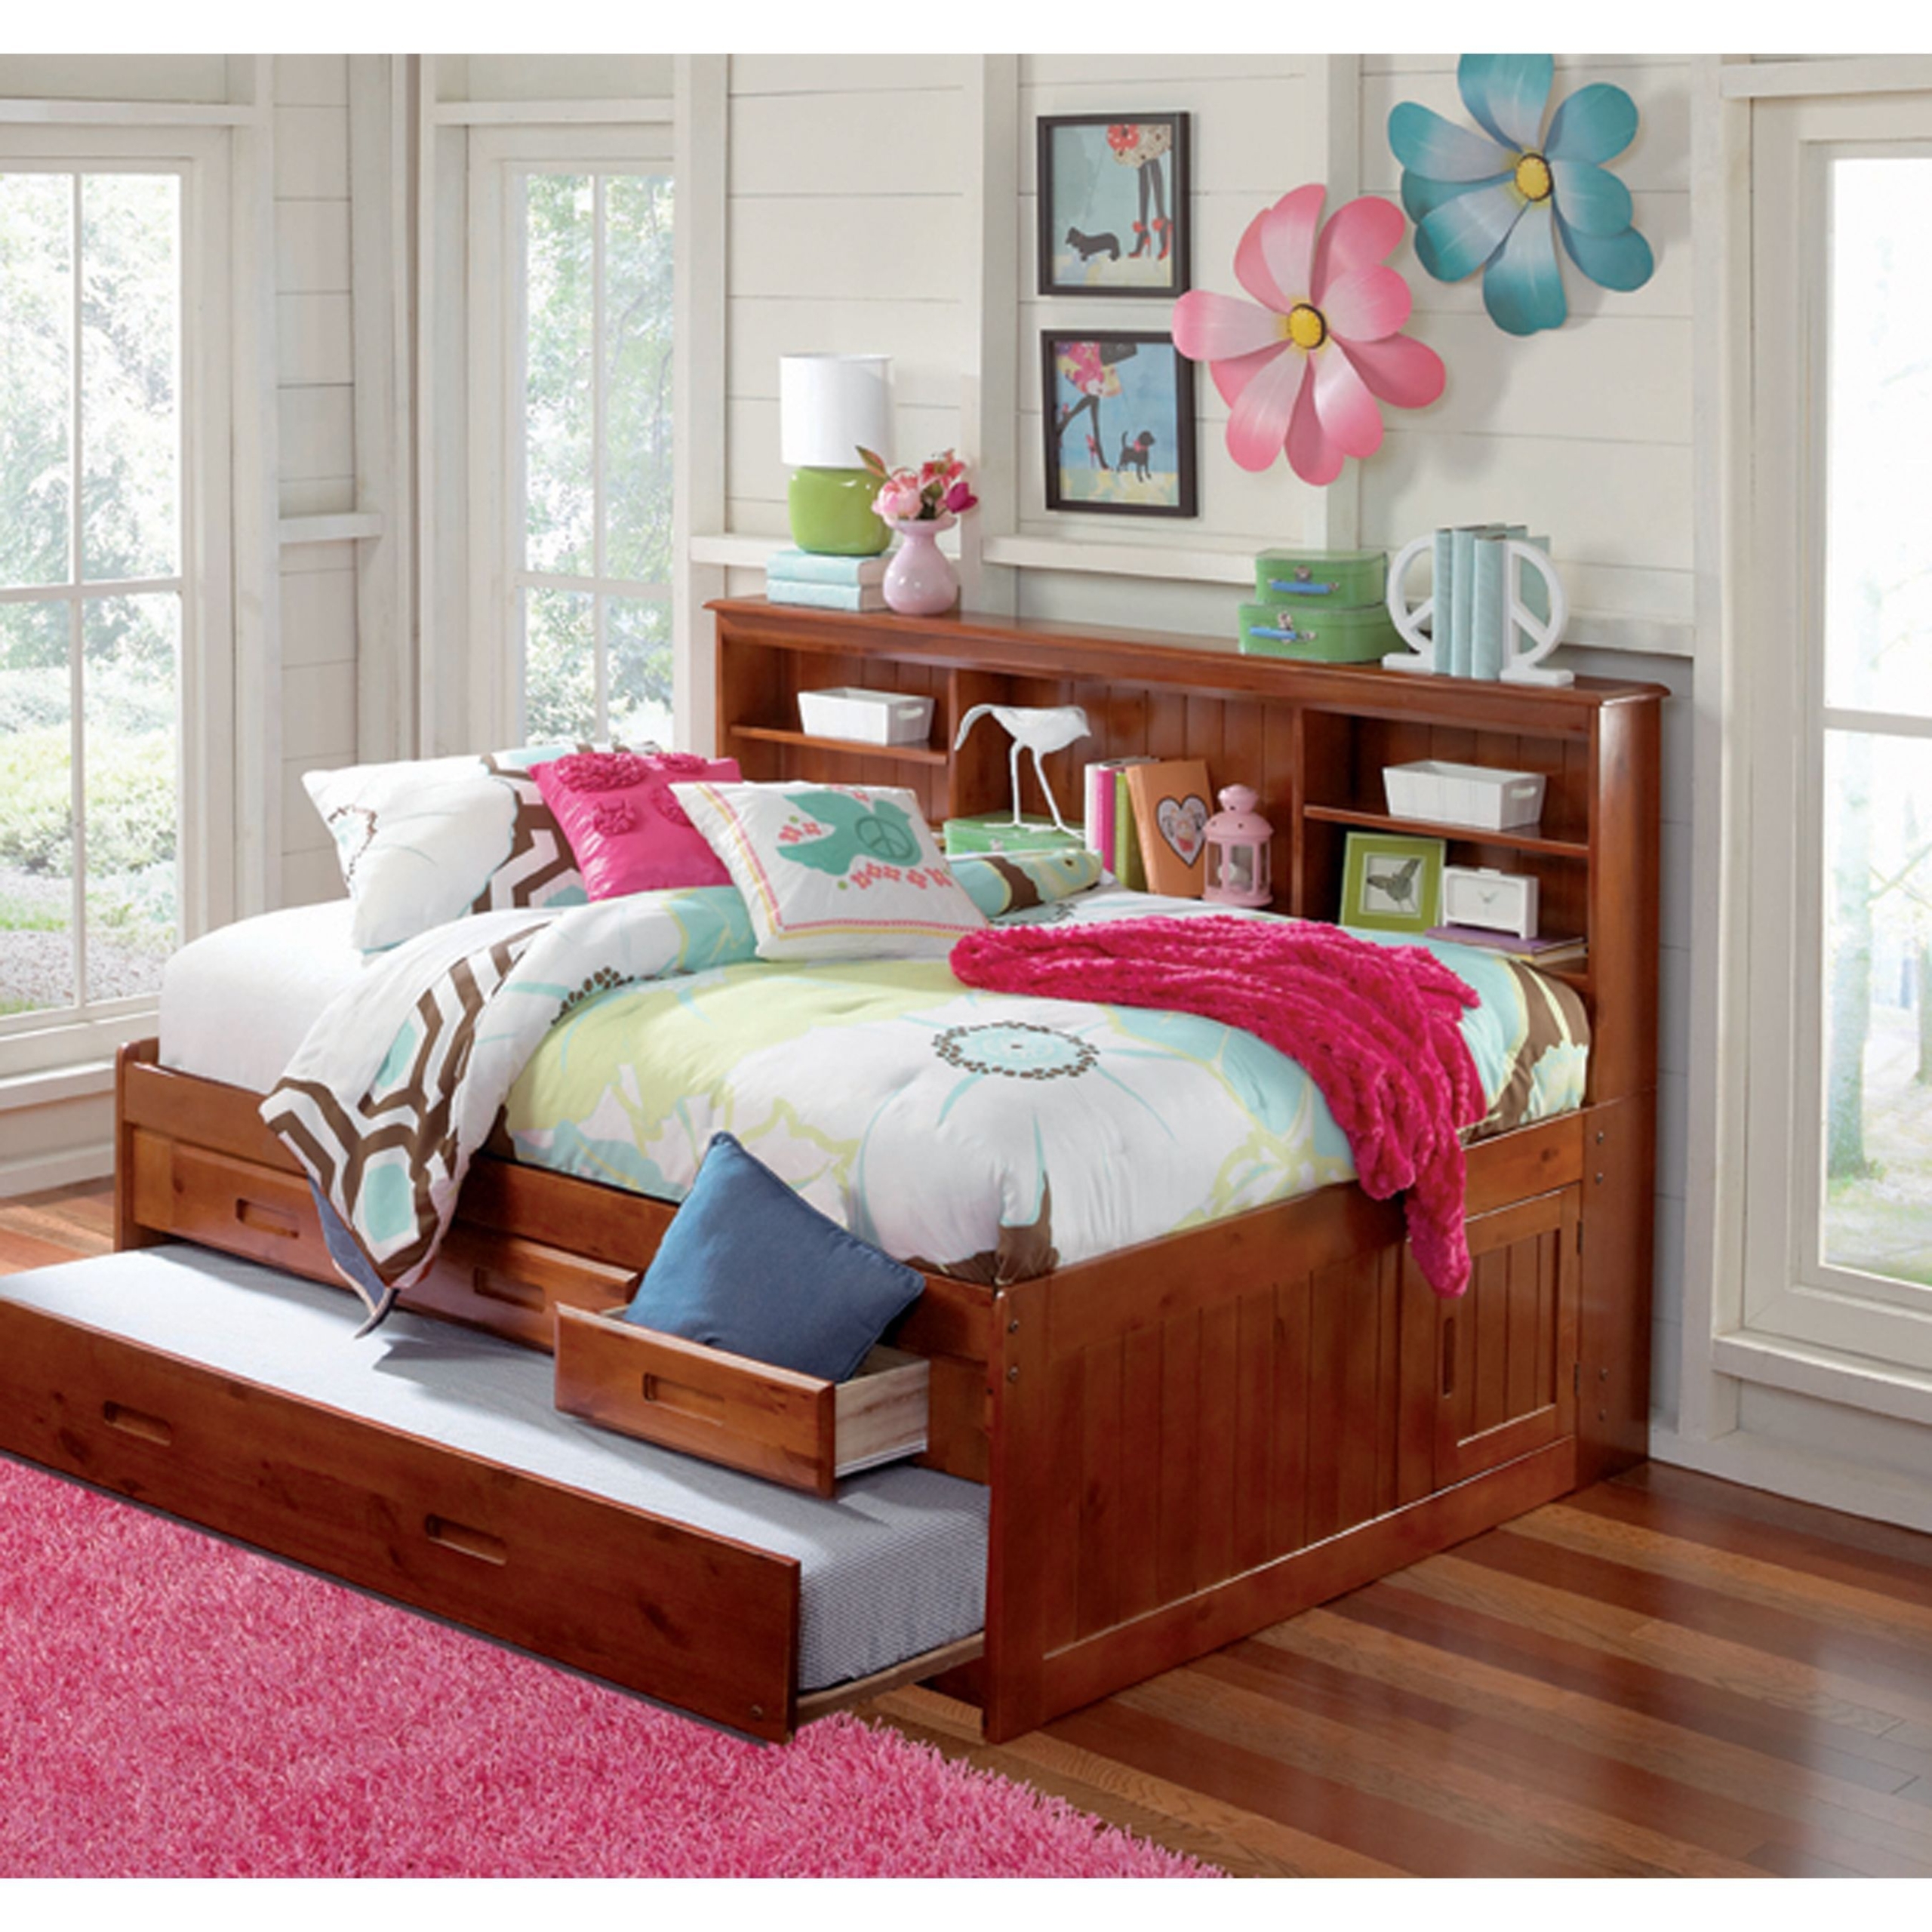 Full bookcase daybed with 3 drawer elevation storage trundle in